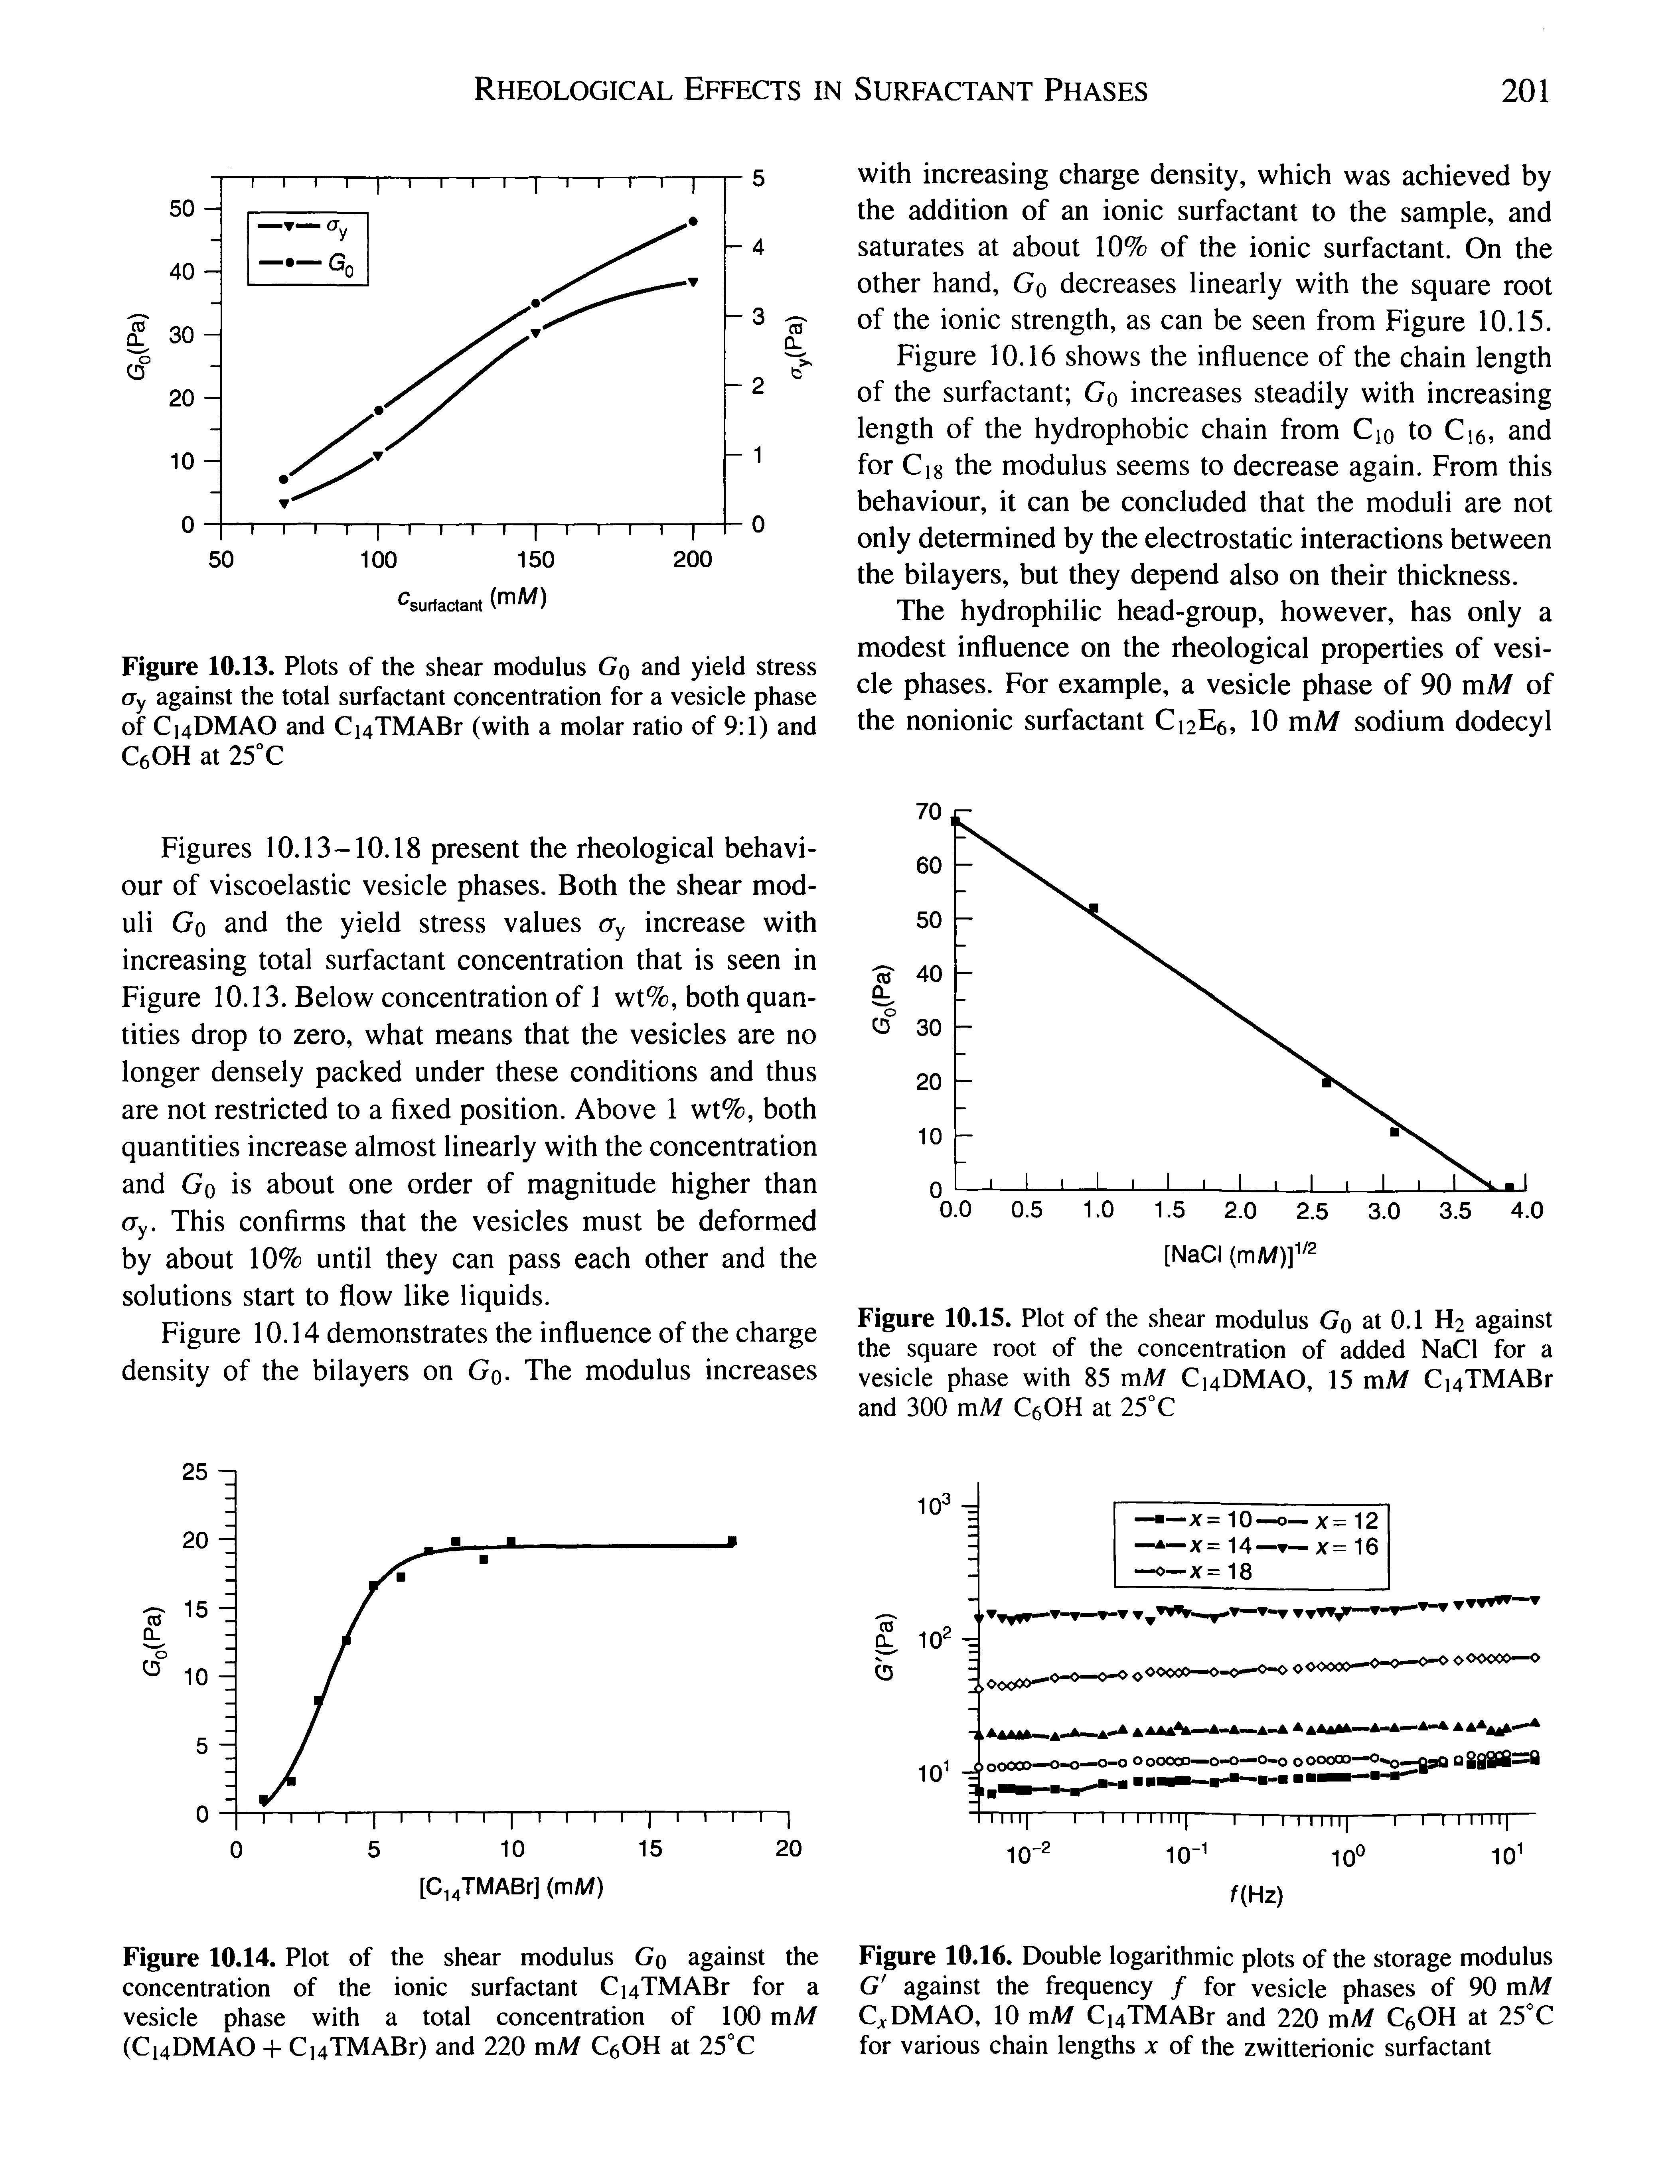 Figures 10.13-10.18 present the rheological behaviour of viscoelastic vesicle phases. Both the shear moduli Go and the yield stress values Gy increase with increasing total surfactant concentration that is seen in Figure 10.13. Below concentration of 1 wt%, both quantities drop to zero, what means that the vesicles are no longer densely packed under these conditions and thus are not restricted to a fixed position. Above 1 wt%, both quantities increase almost linearly with the concentration and Go is about one order of magnitude higher than Gy. This confirms that the vesicles must be deformed by about 10% until they can pass each other and the solutions start to flow like liquids.